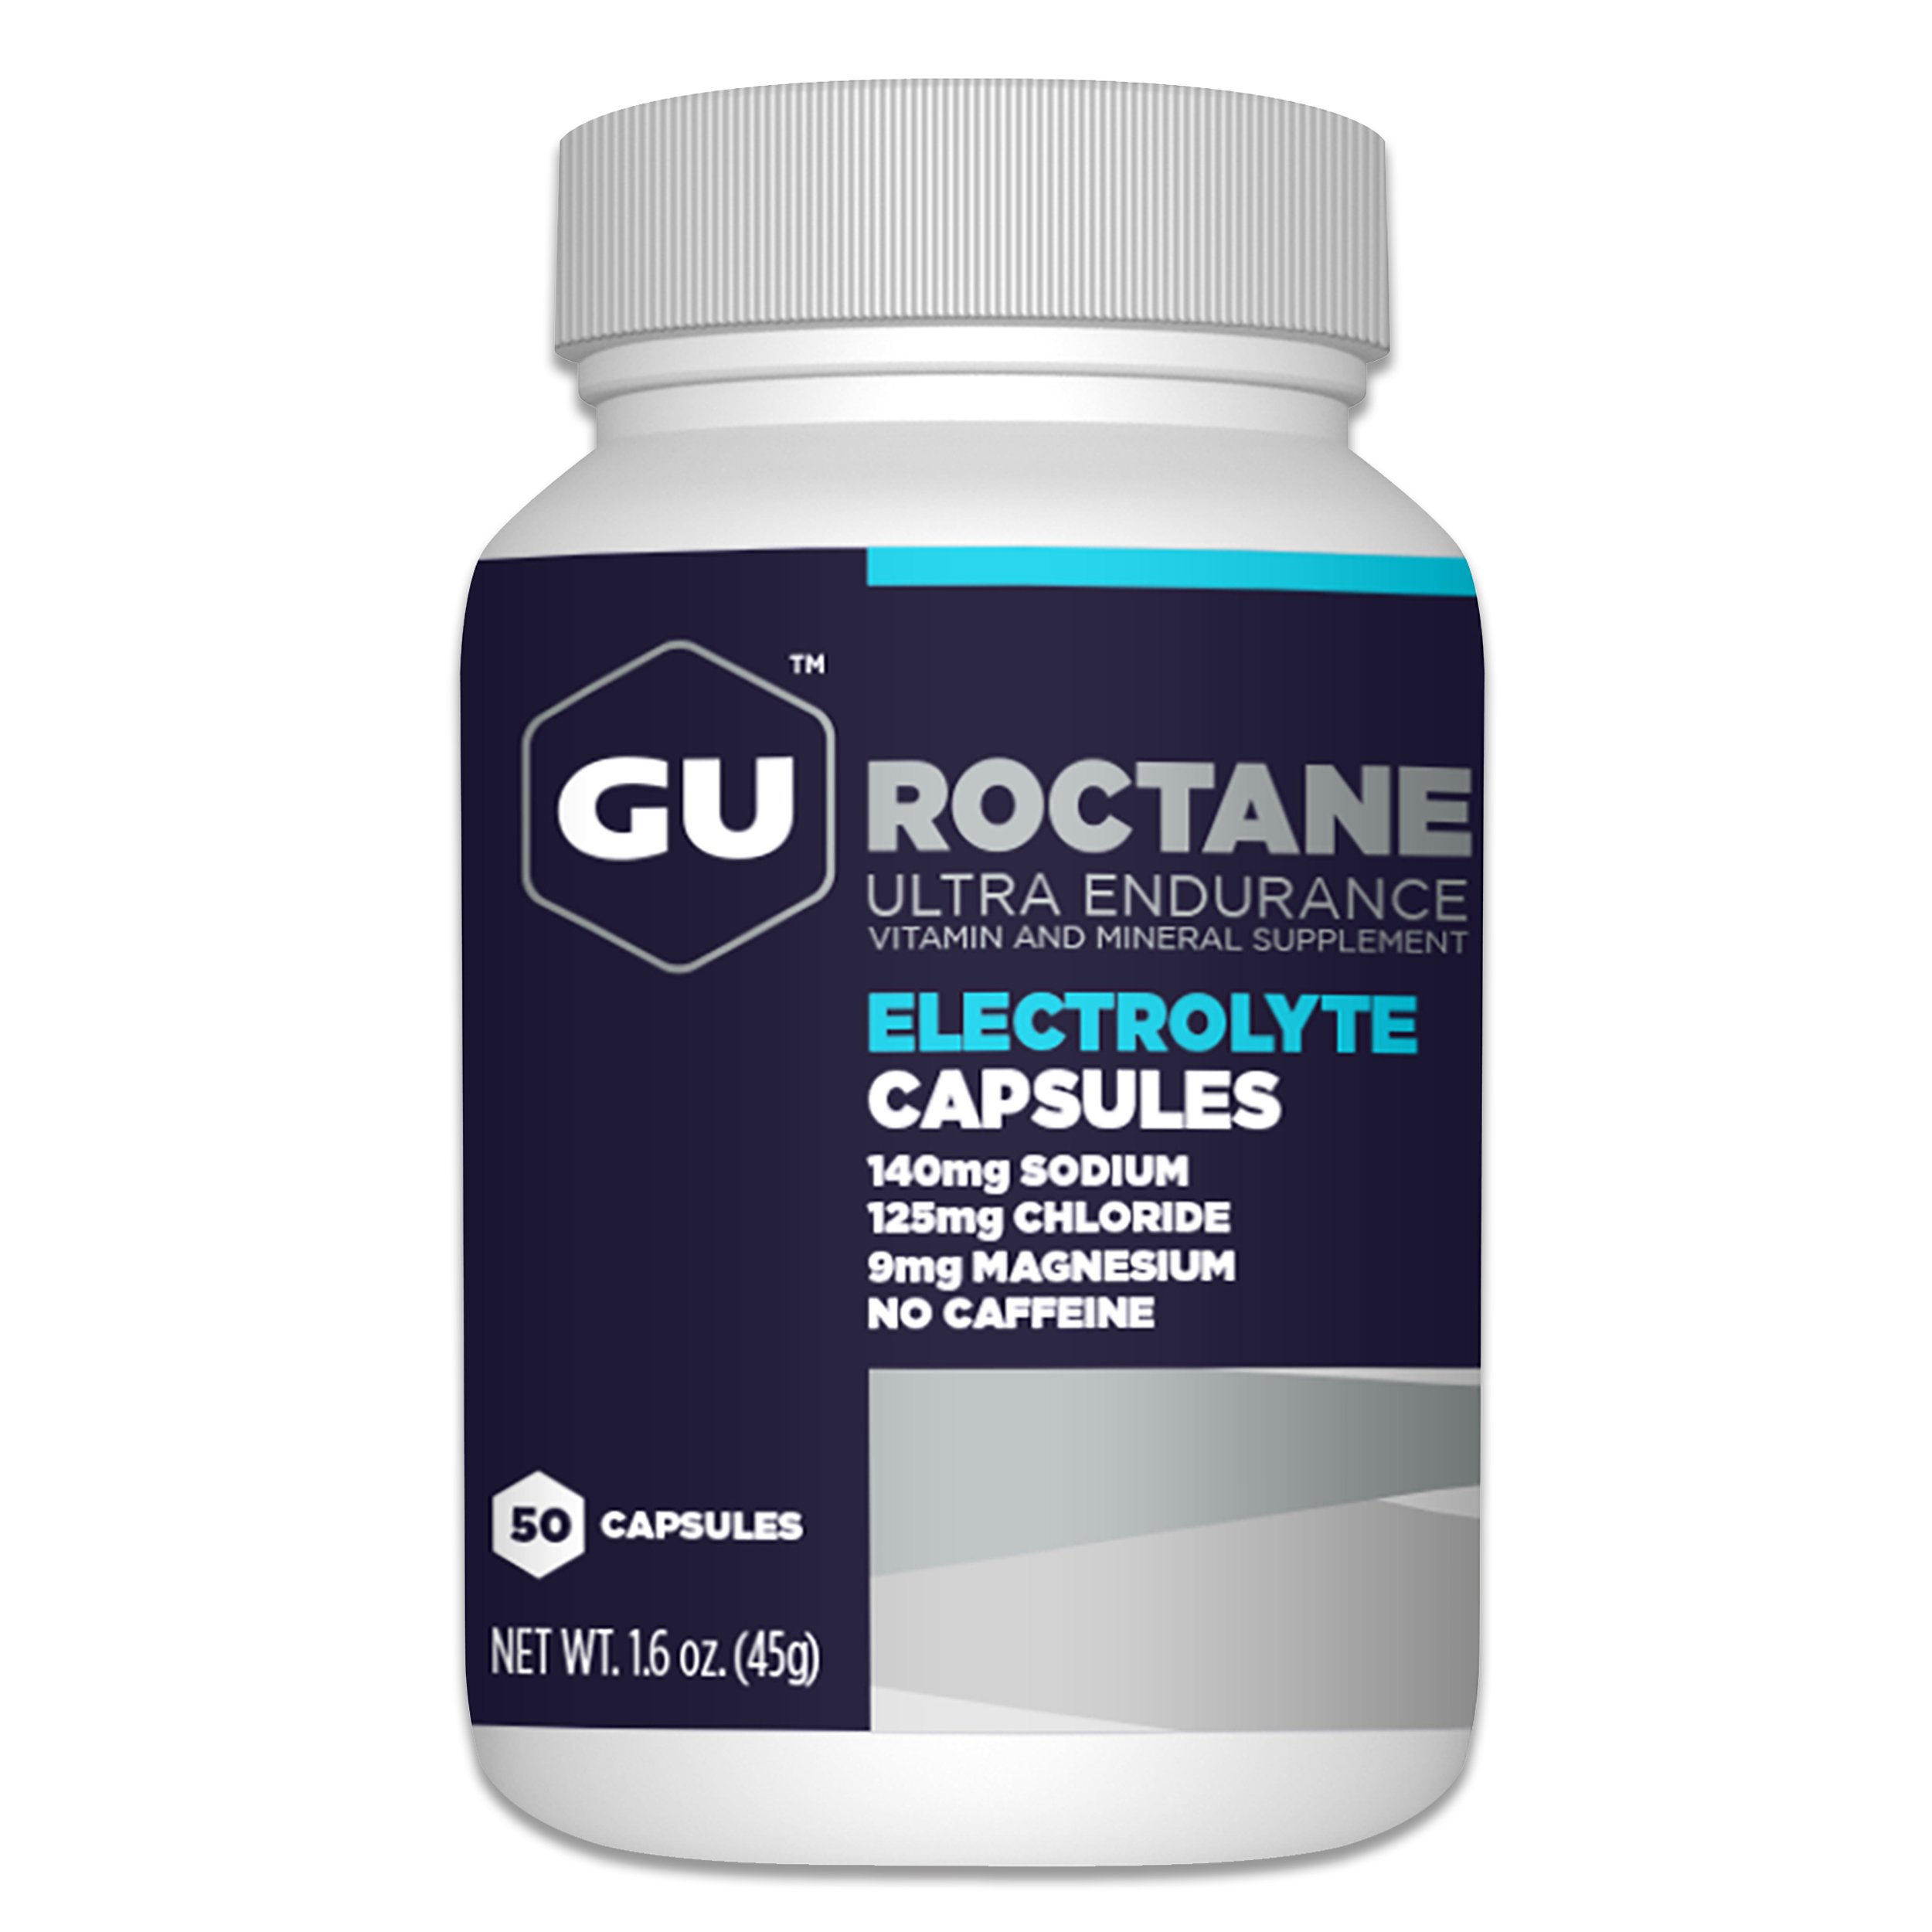 GU Energy Roctane Ultra Endurance Variety Pack; Electrolyte Capsules and BCAA Branch Chain Amino Acid with Vitamin B Capsules, 2 Bottles (110 Total)